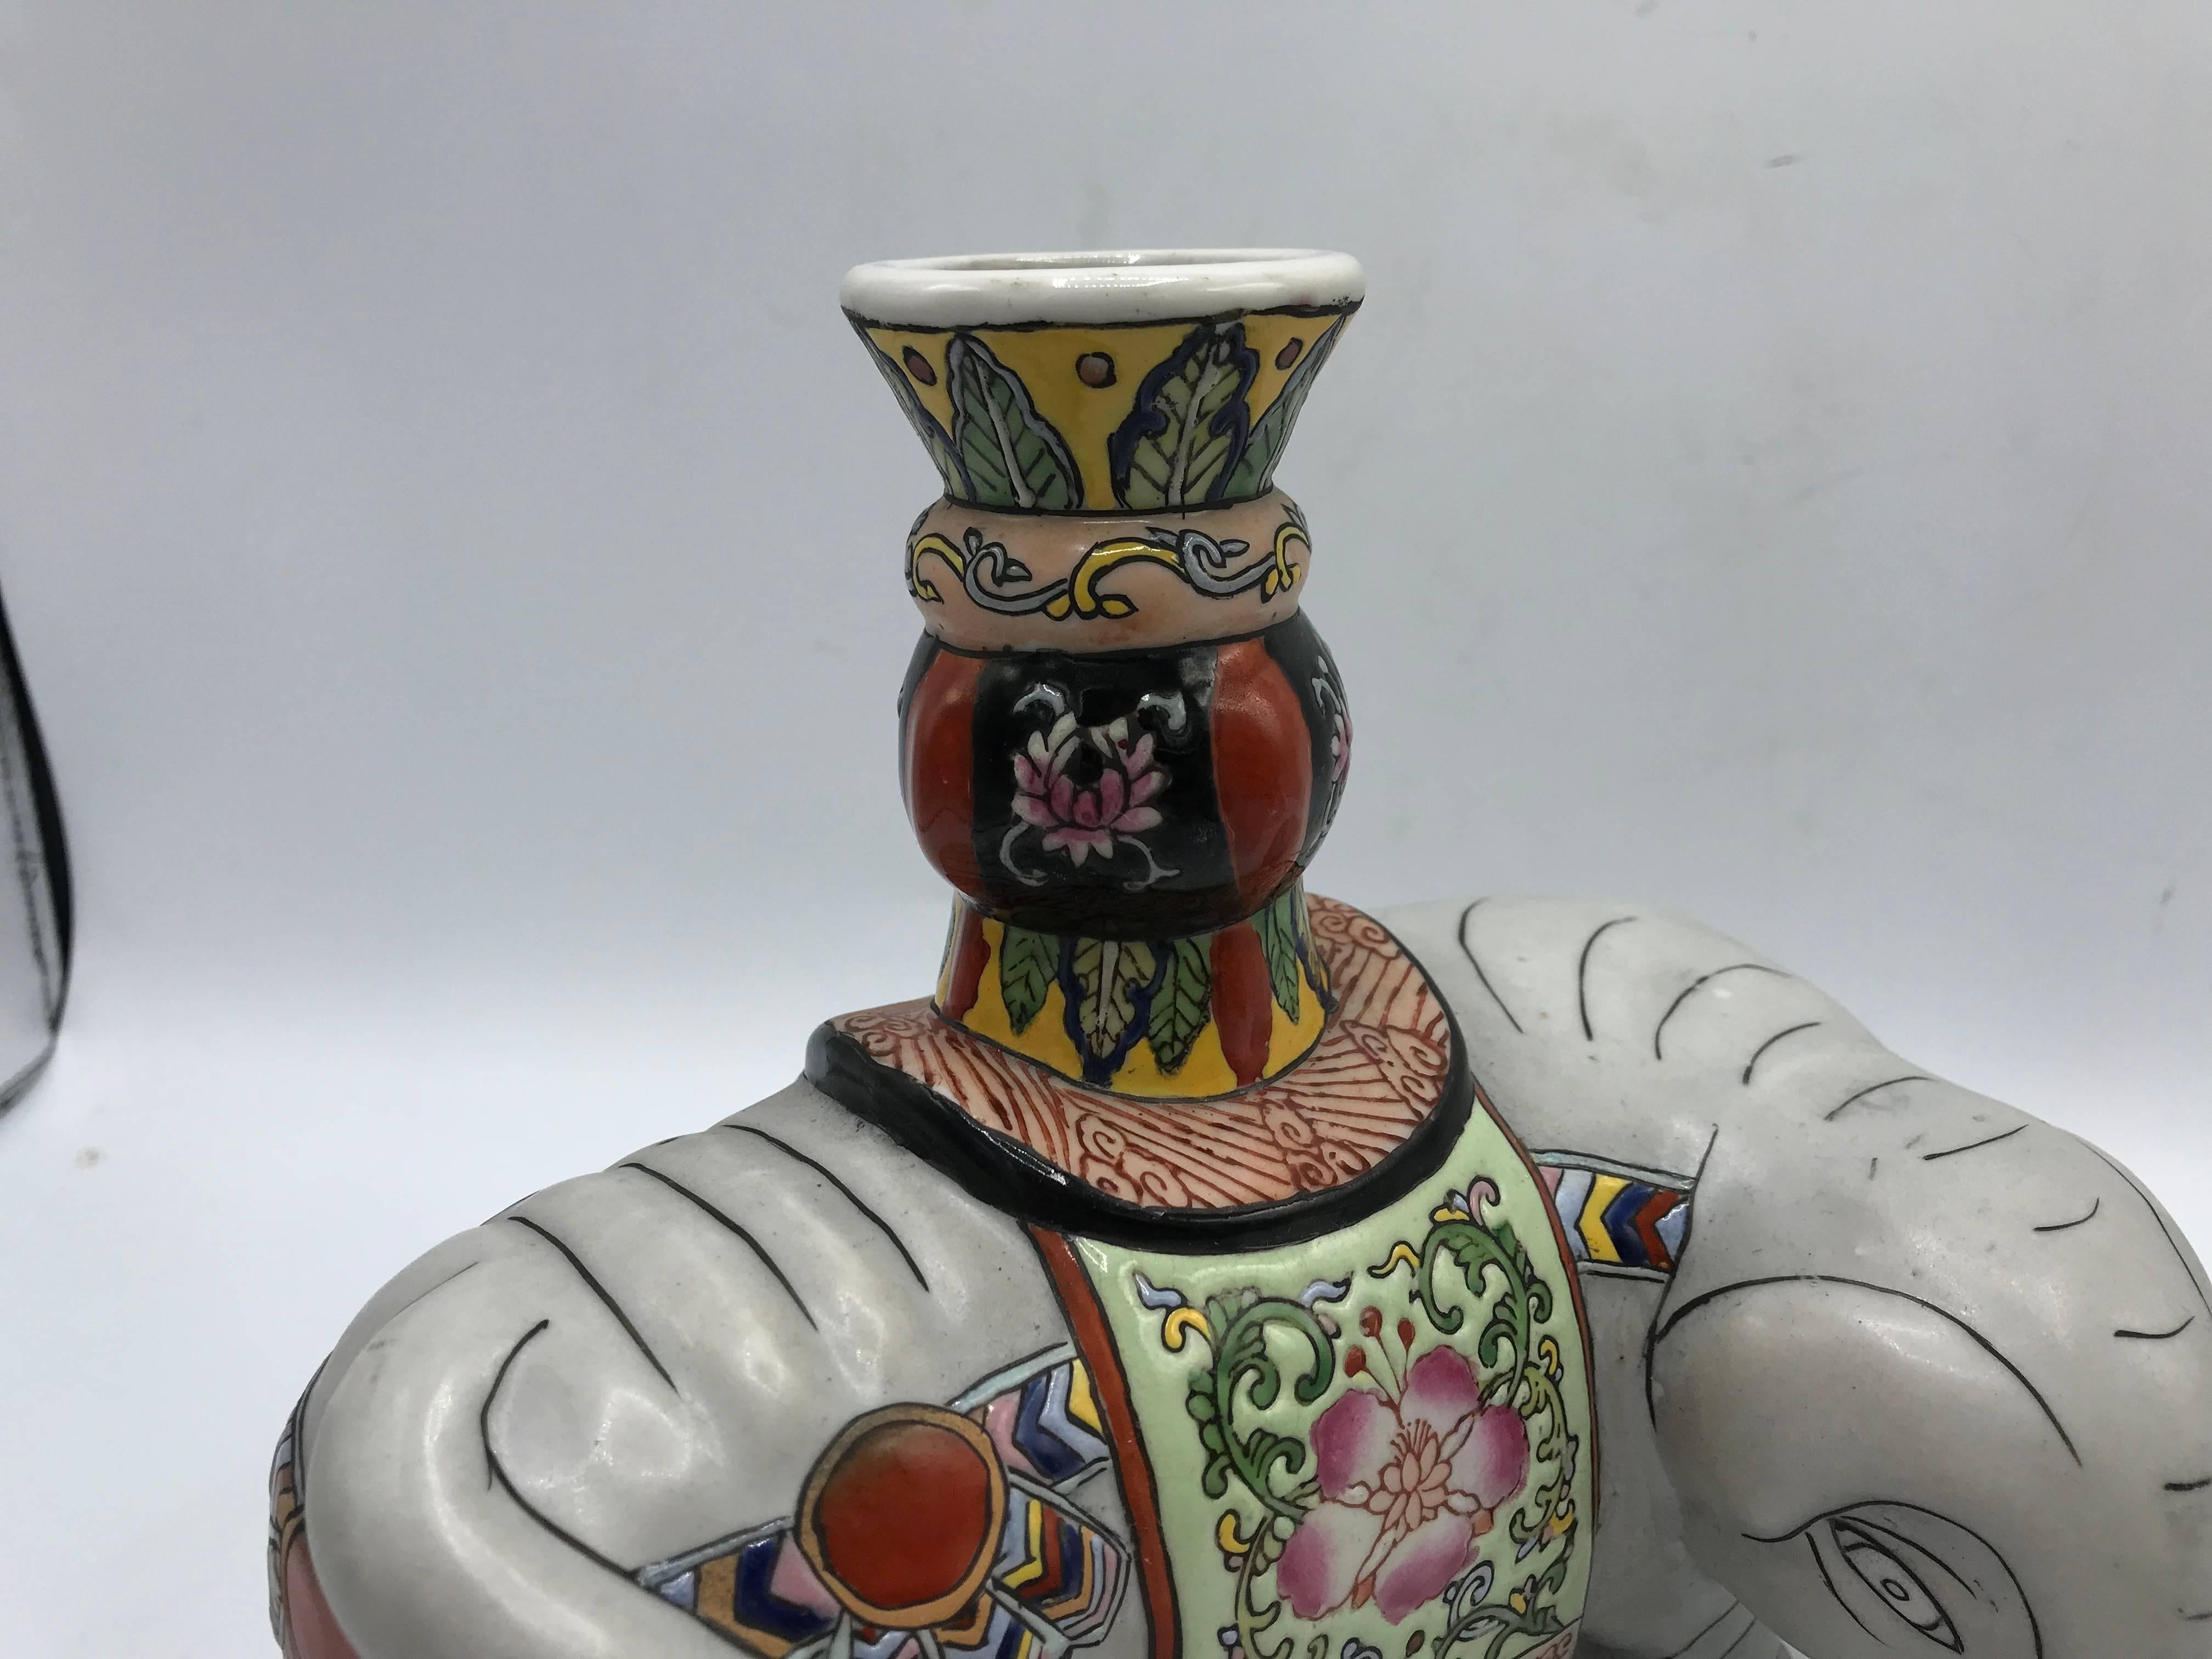 1960s Polychrome Ceramic Elephant Sculpture Candlestick Holders, Pair For Sale 1